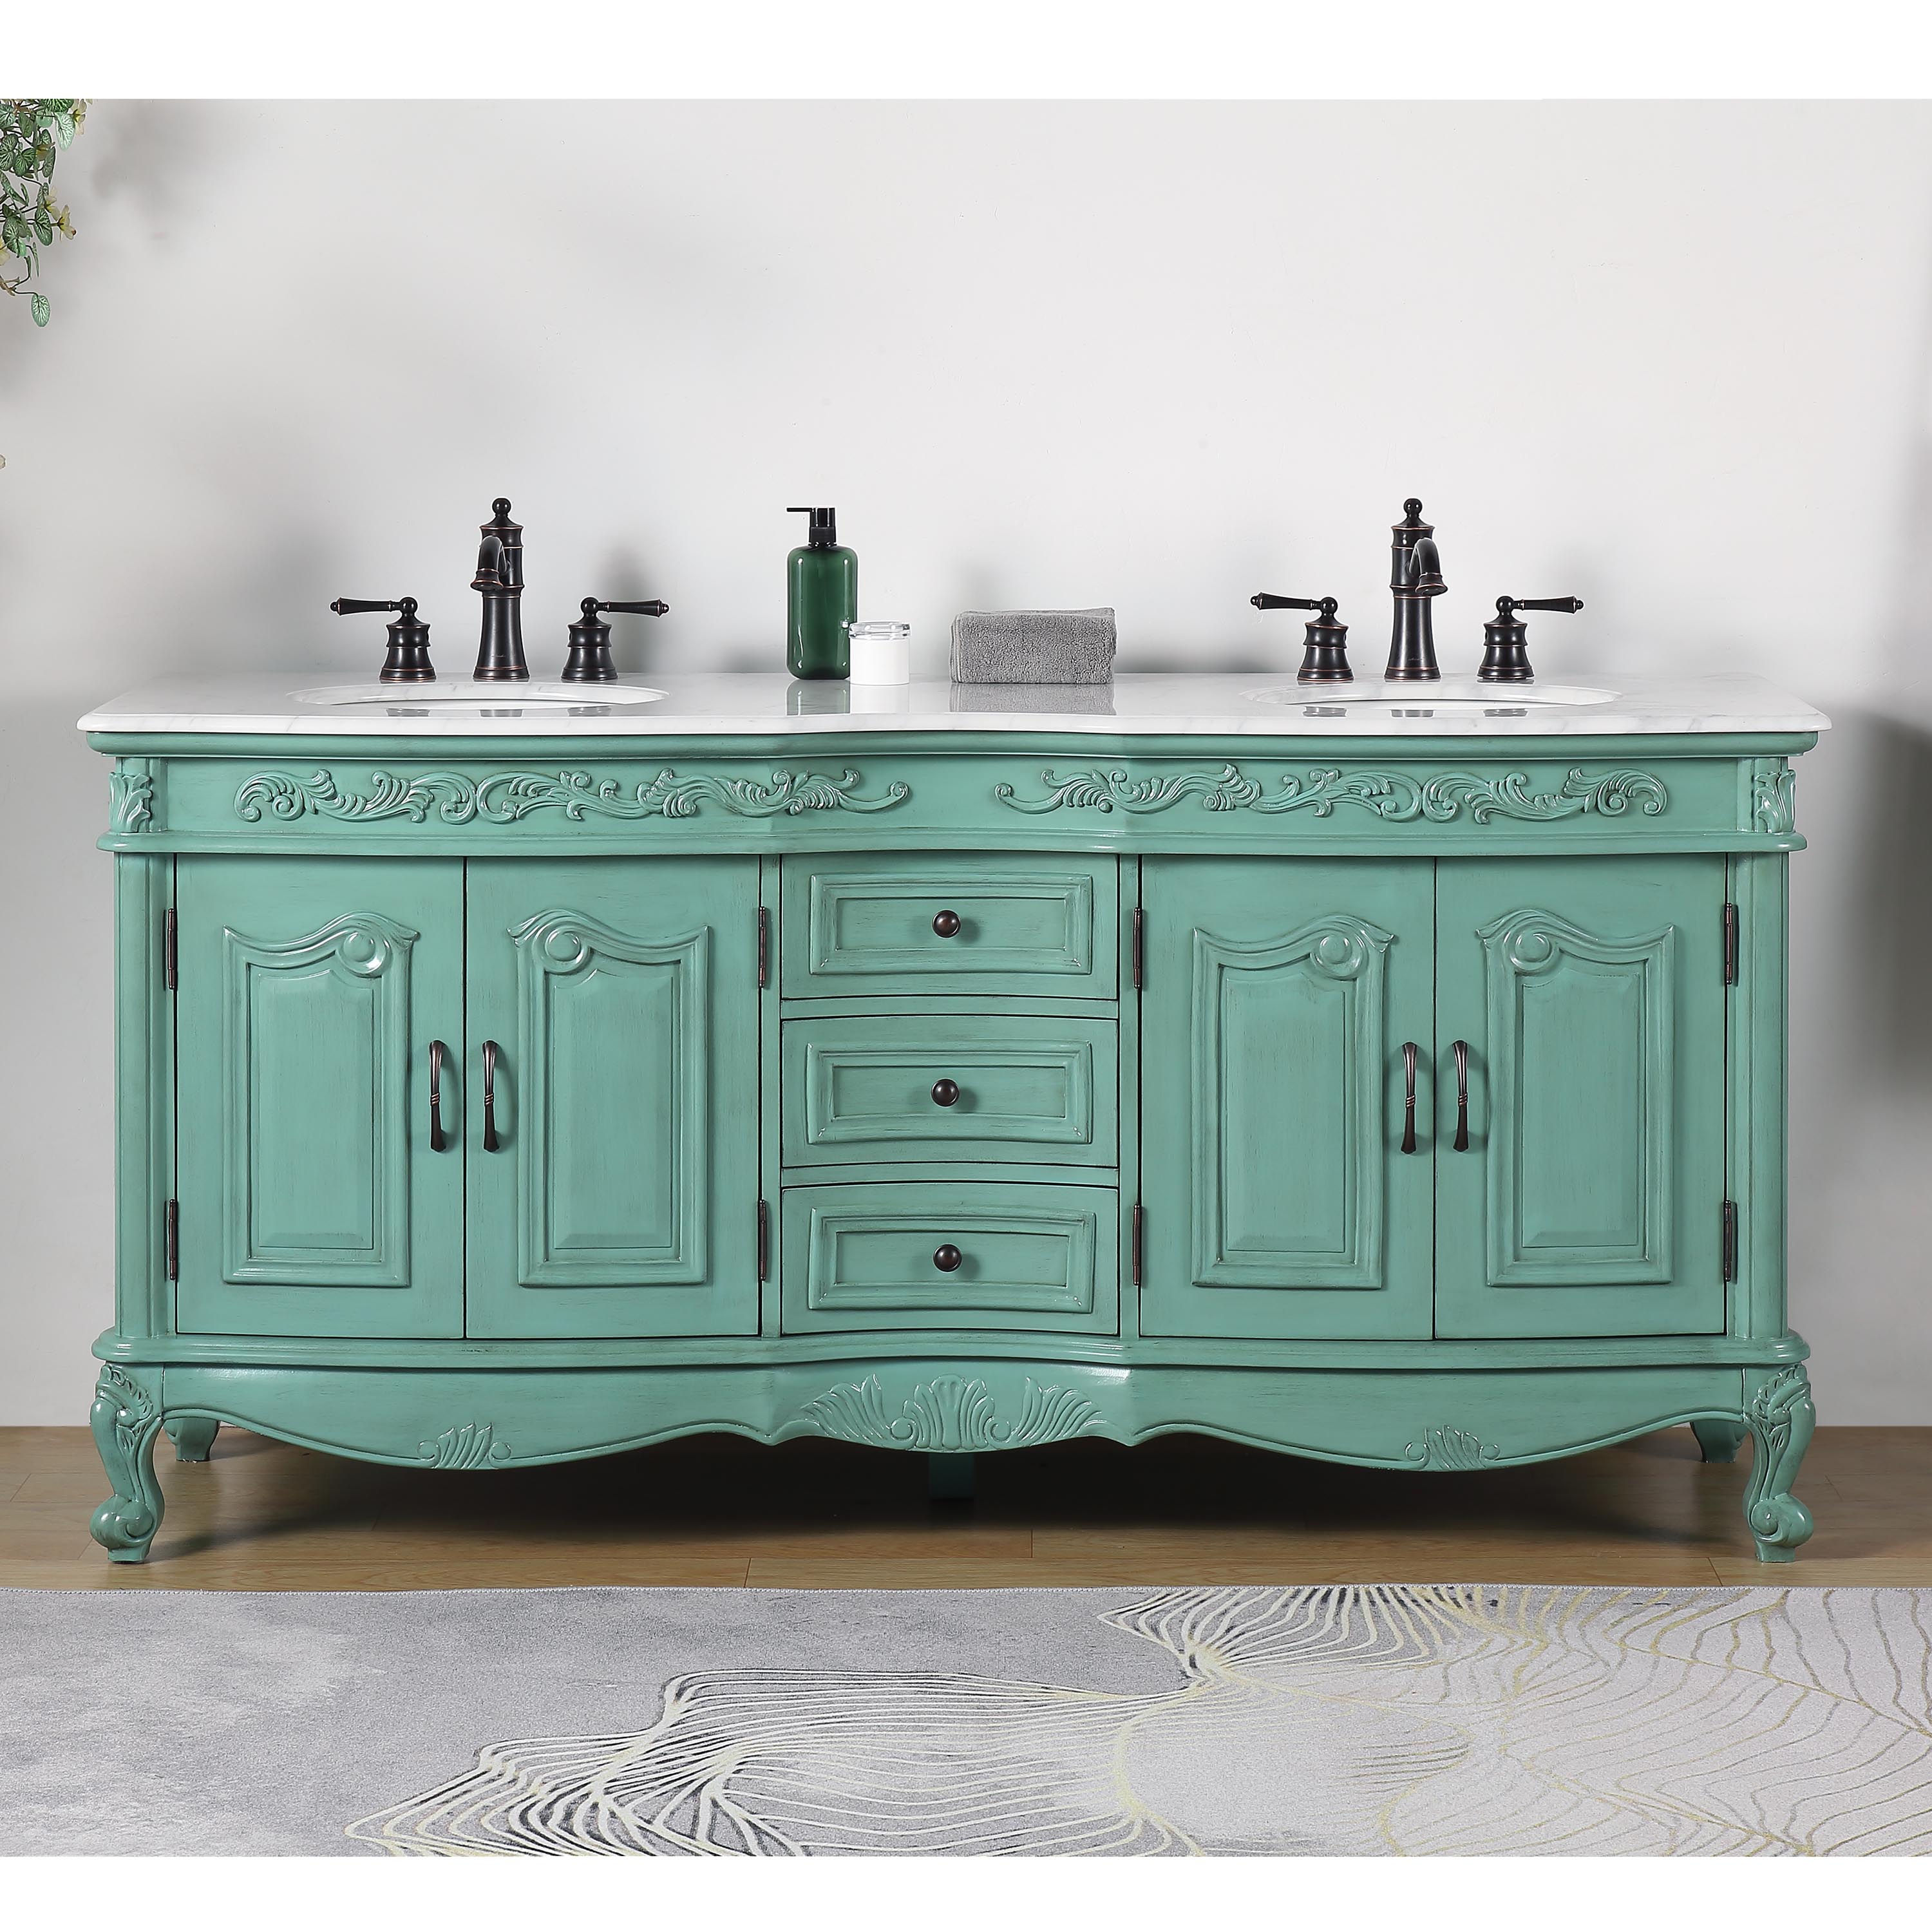 Adelina 72" Mint Green Double Sink Traditional Style Bathroom Vanity with White Carrara Marble Countertop